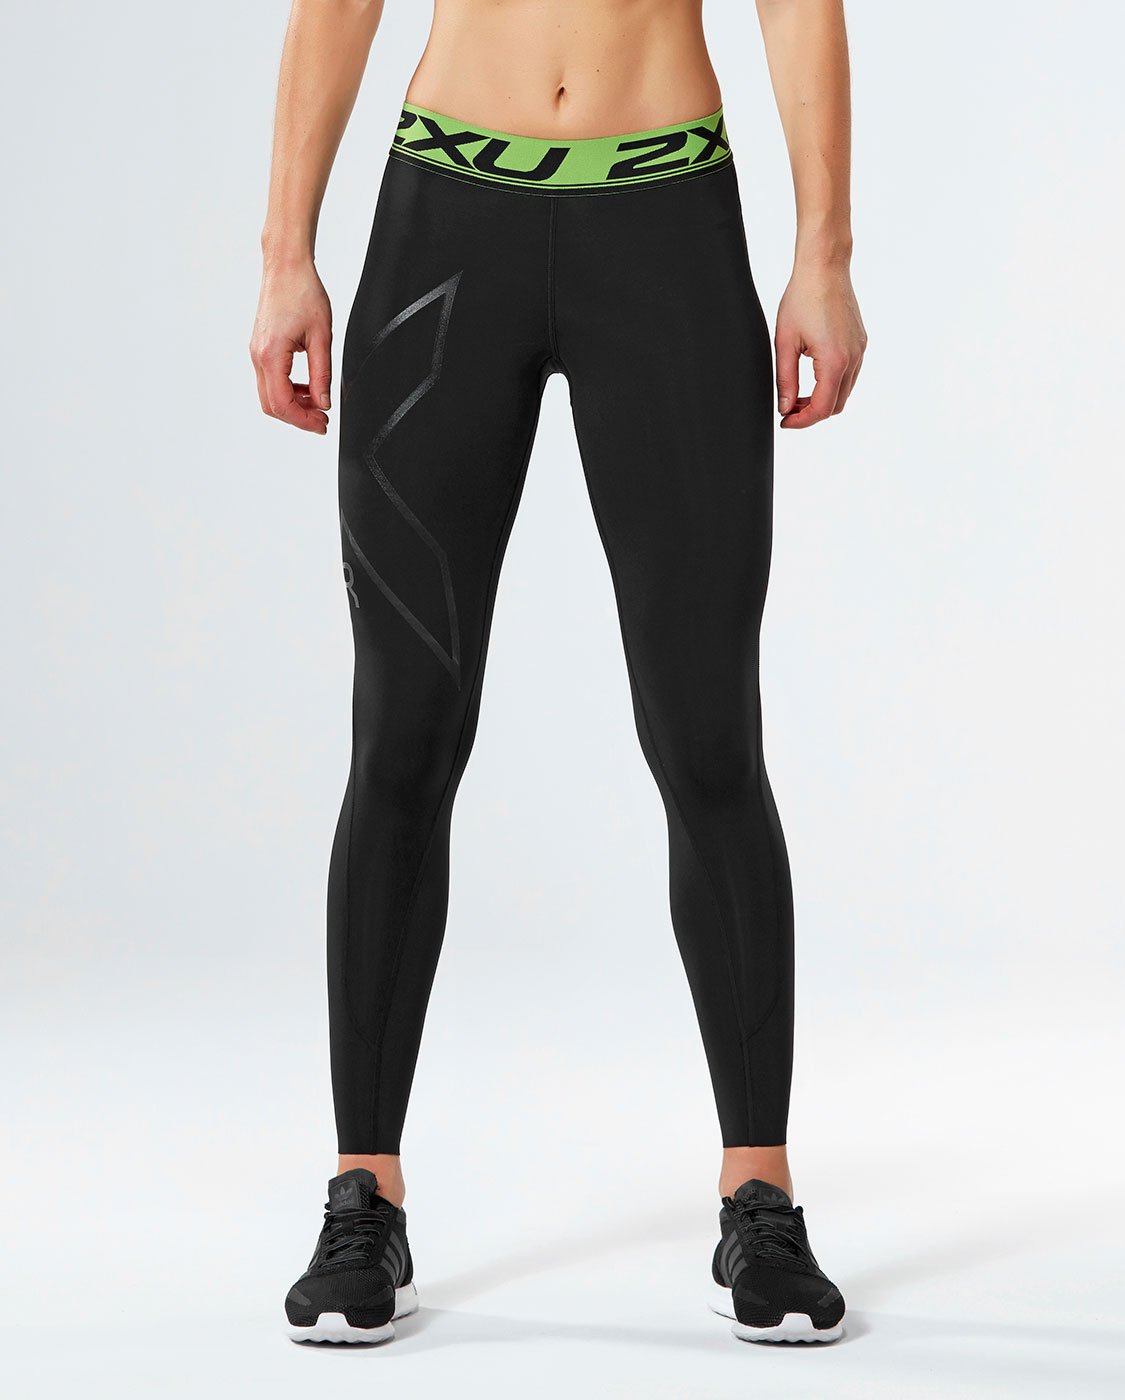 2xU Women's Ignition Shield Compression Running Tights Small for sale  online